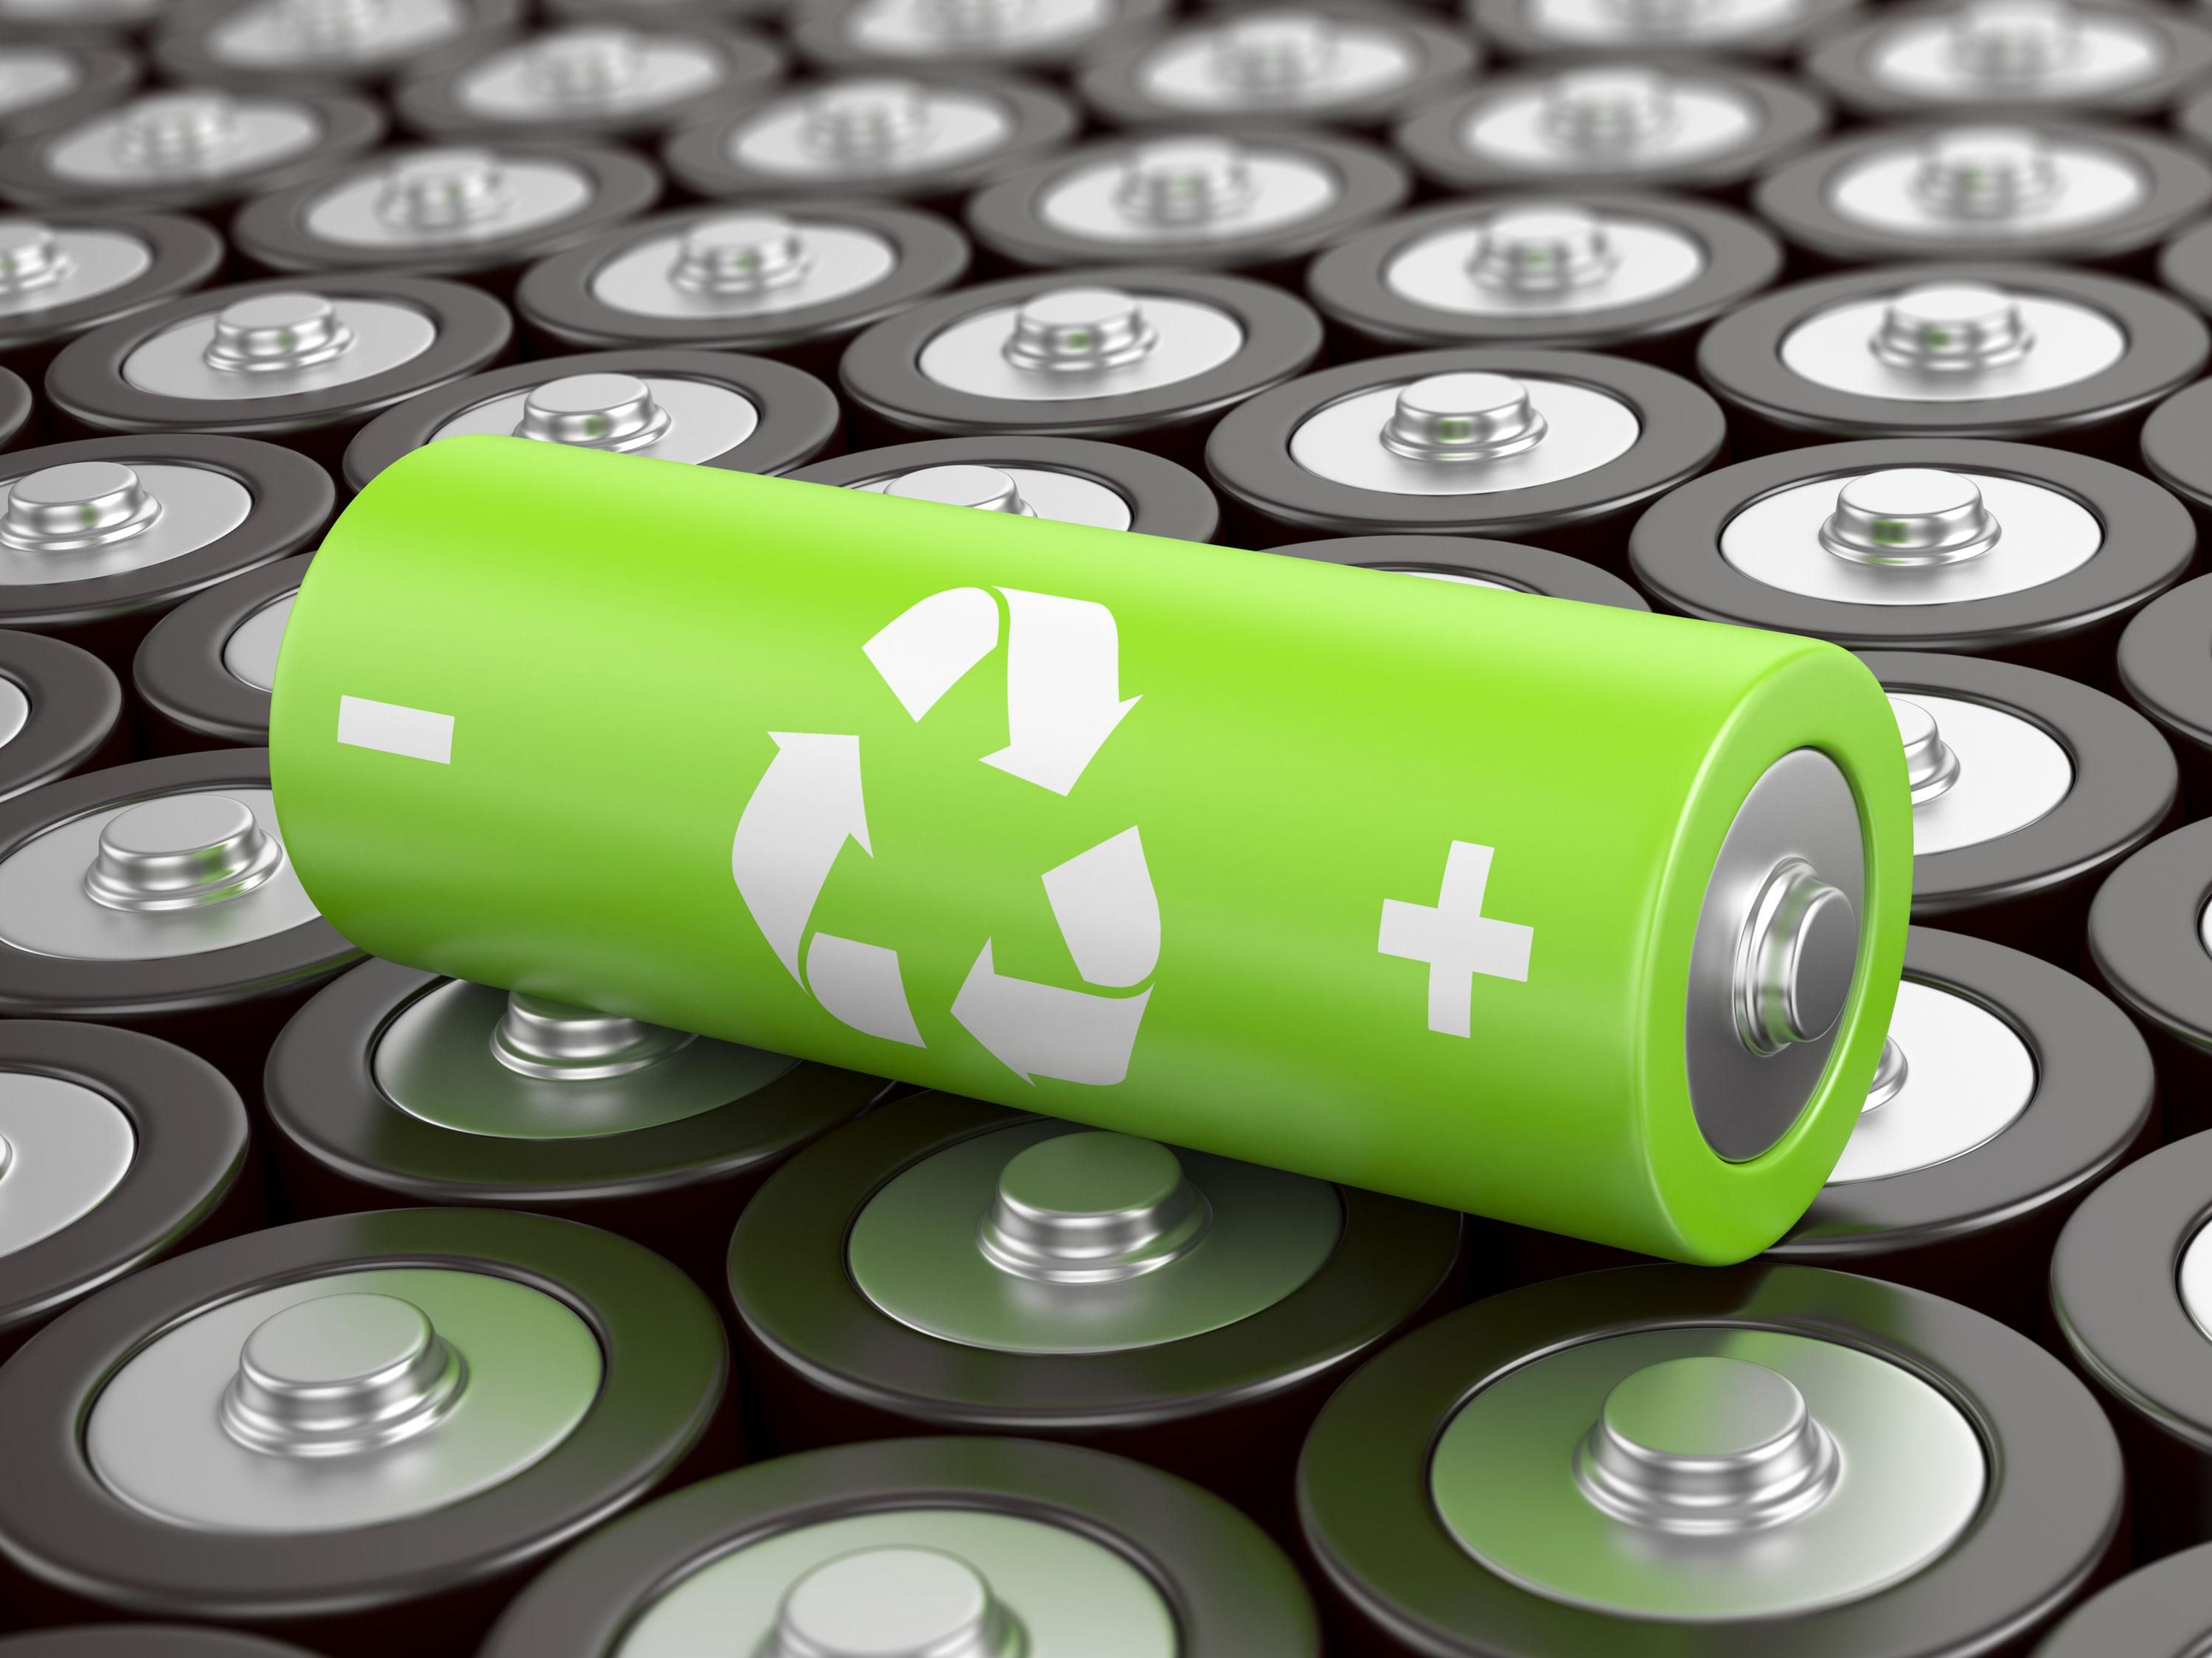 Study: Recycled Lithium Batteries as Good as Newly Mined - IEEE Spectrum